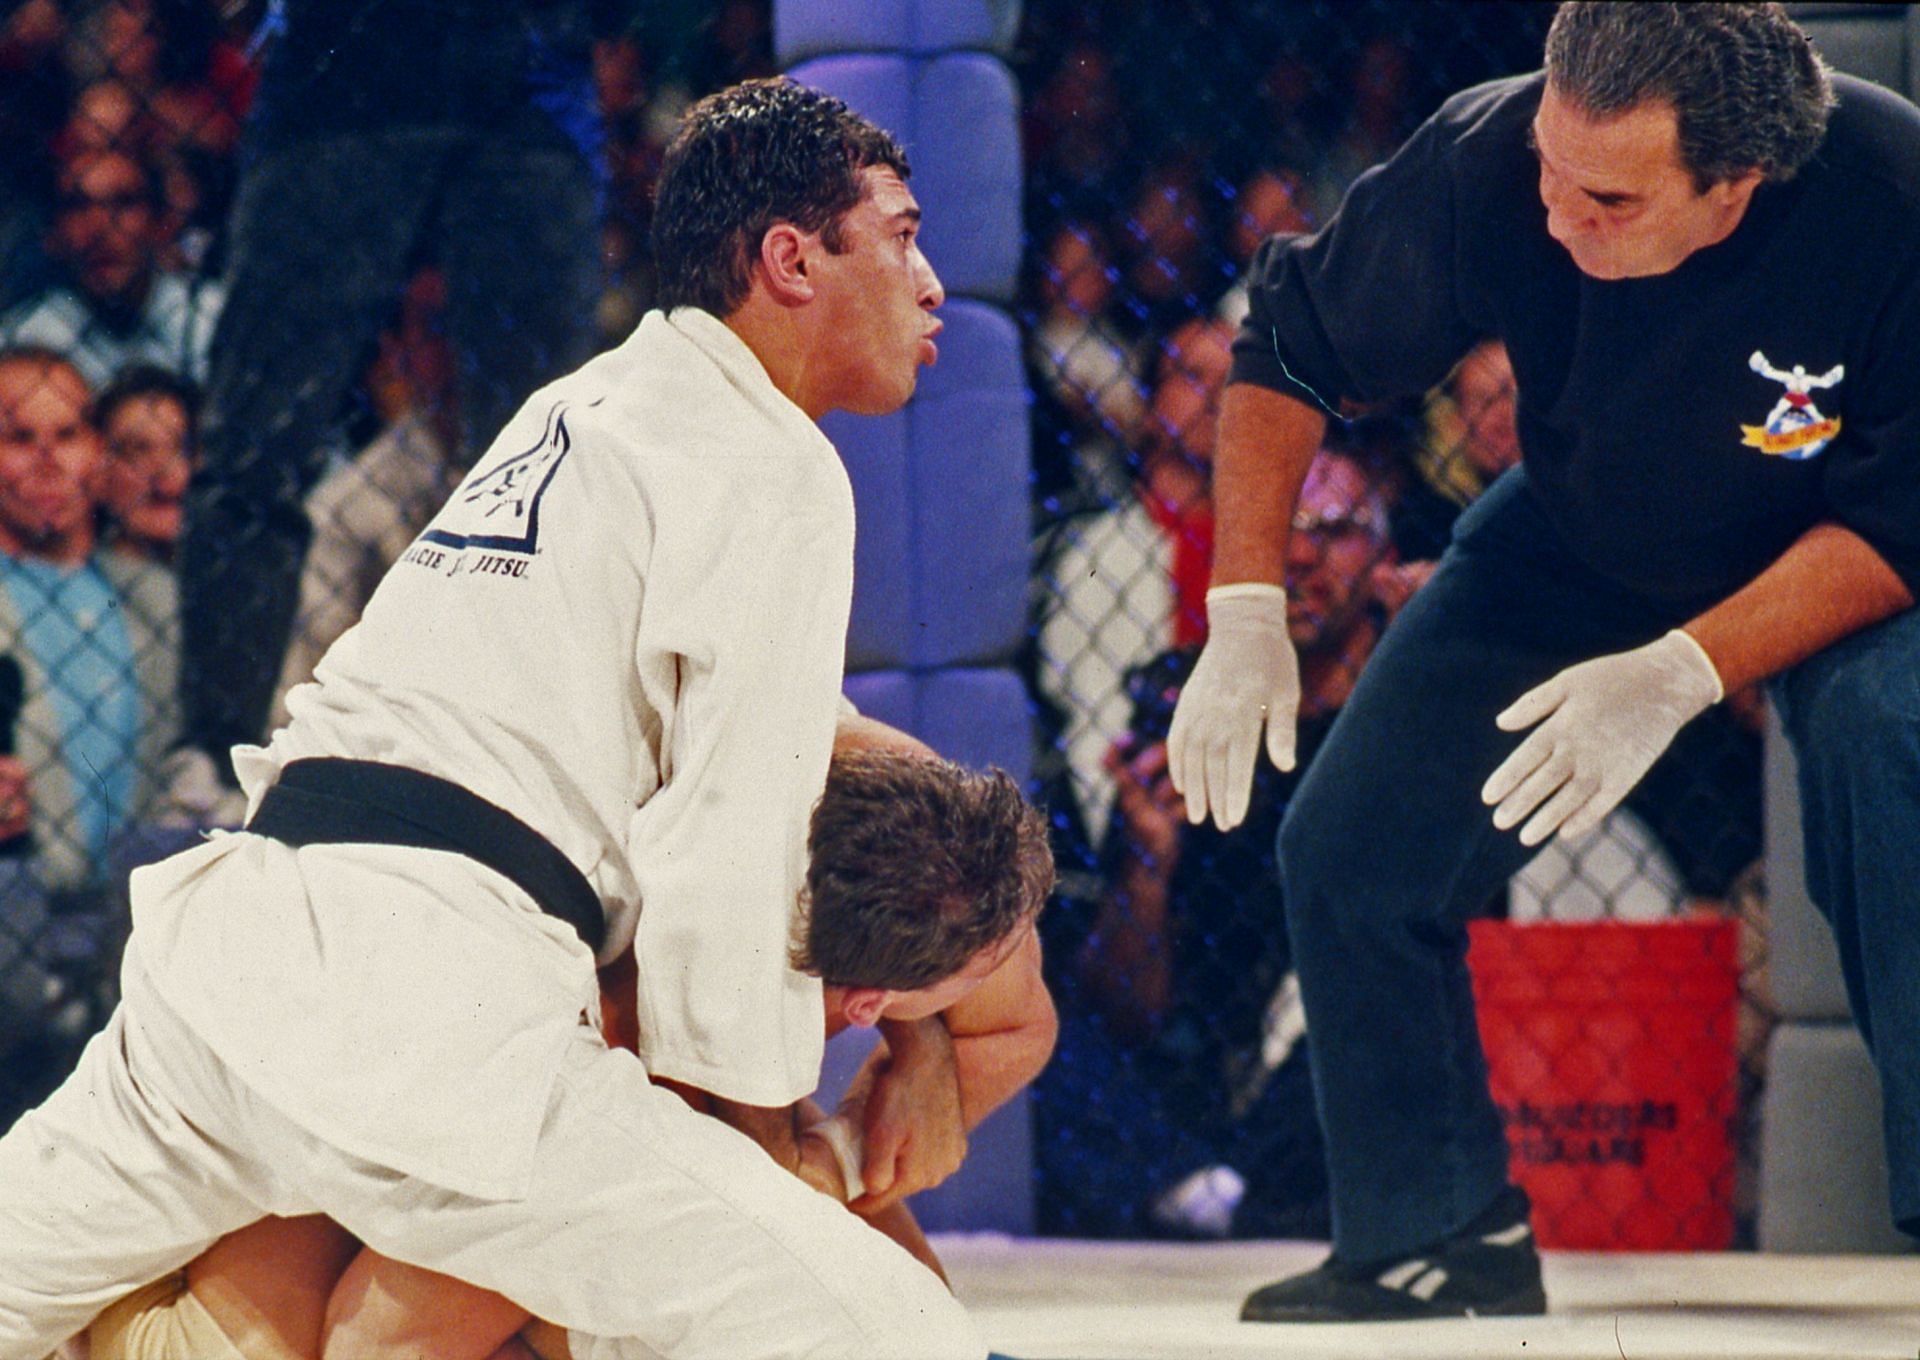 Royce Gracie submitted Ken Shamrock in 1993 to start their legendary rivalry